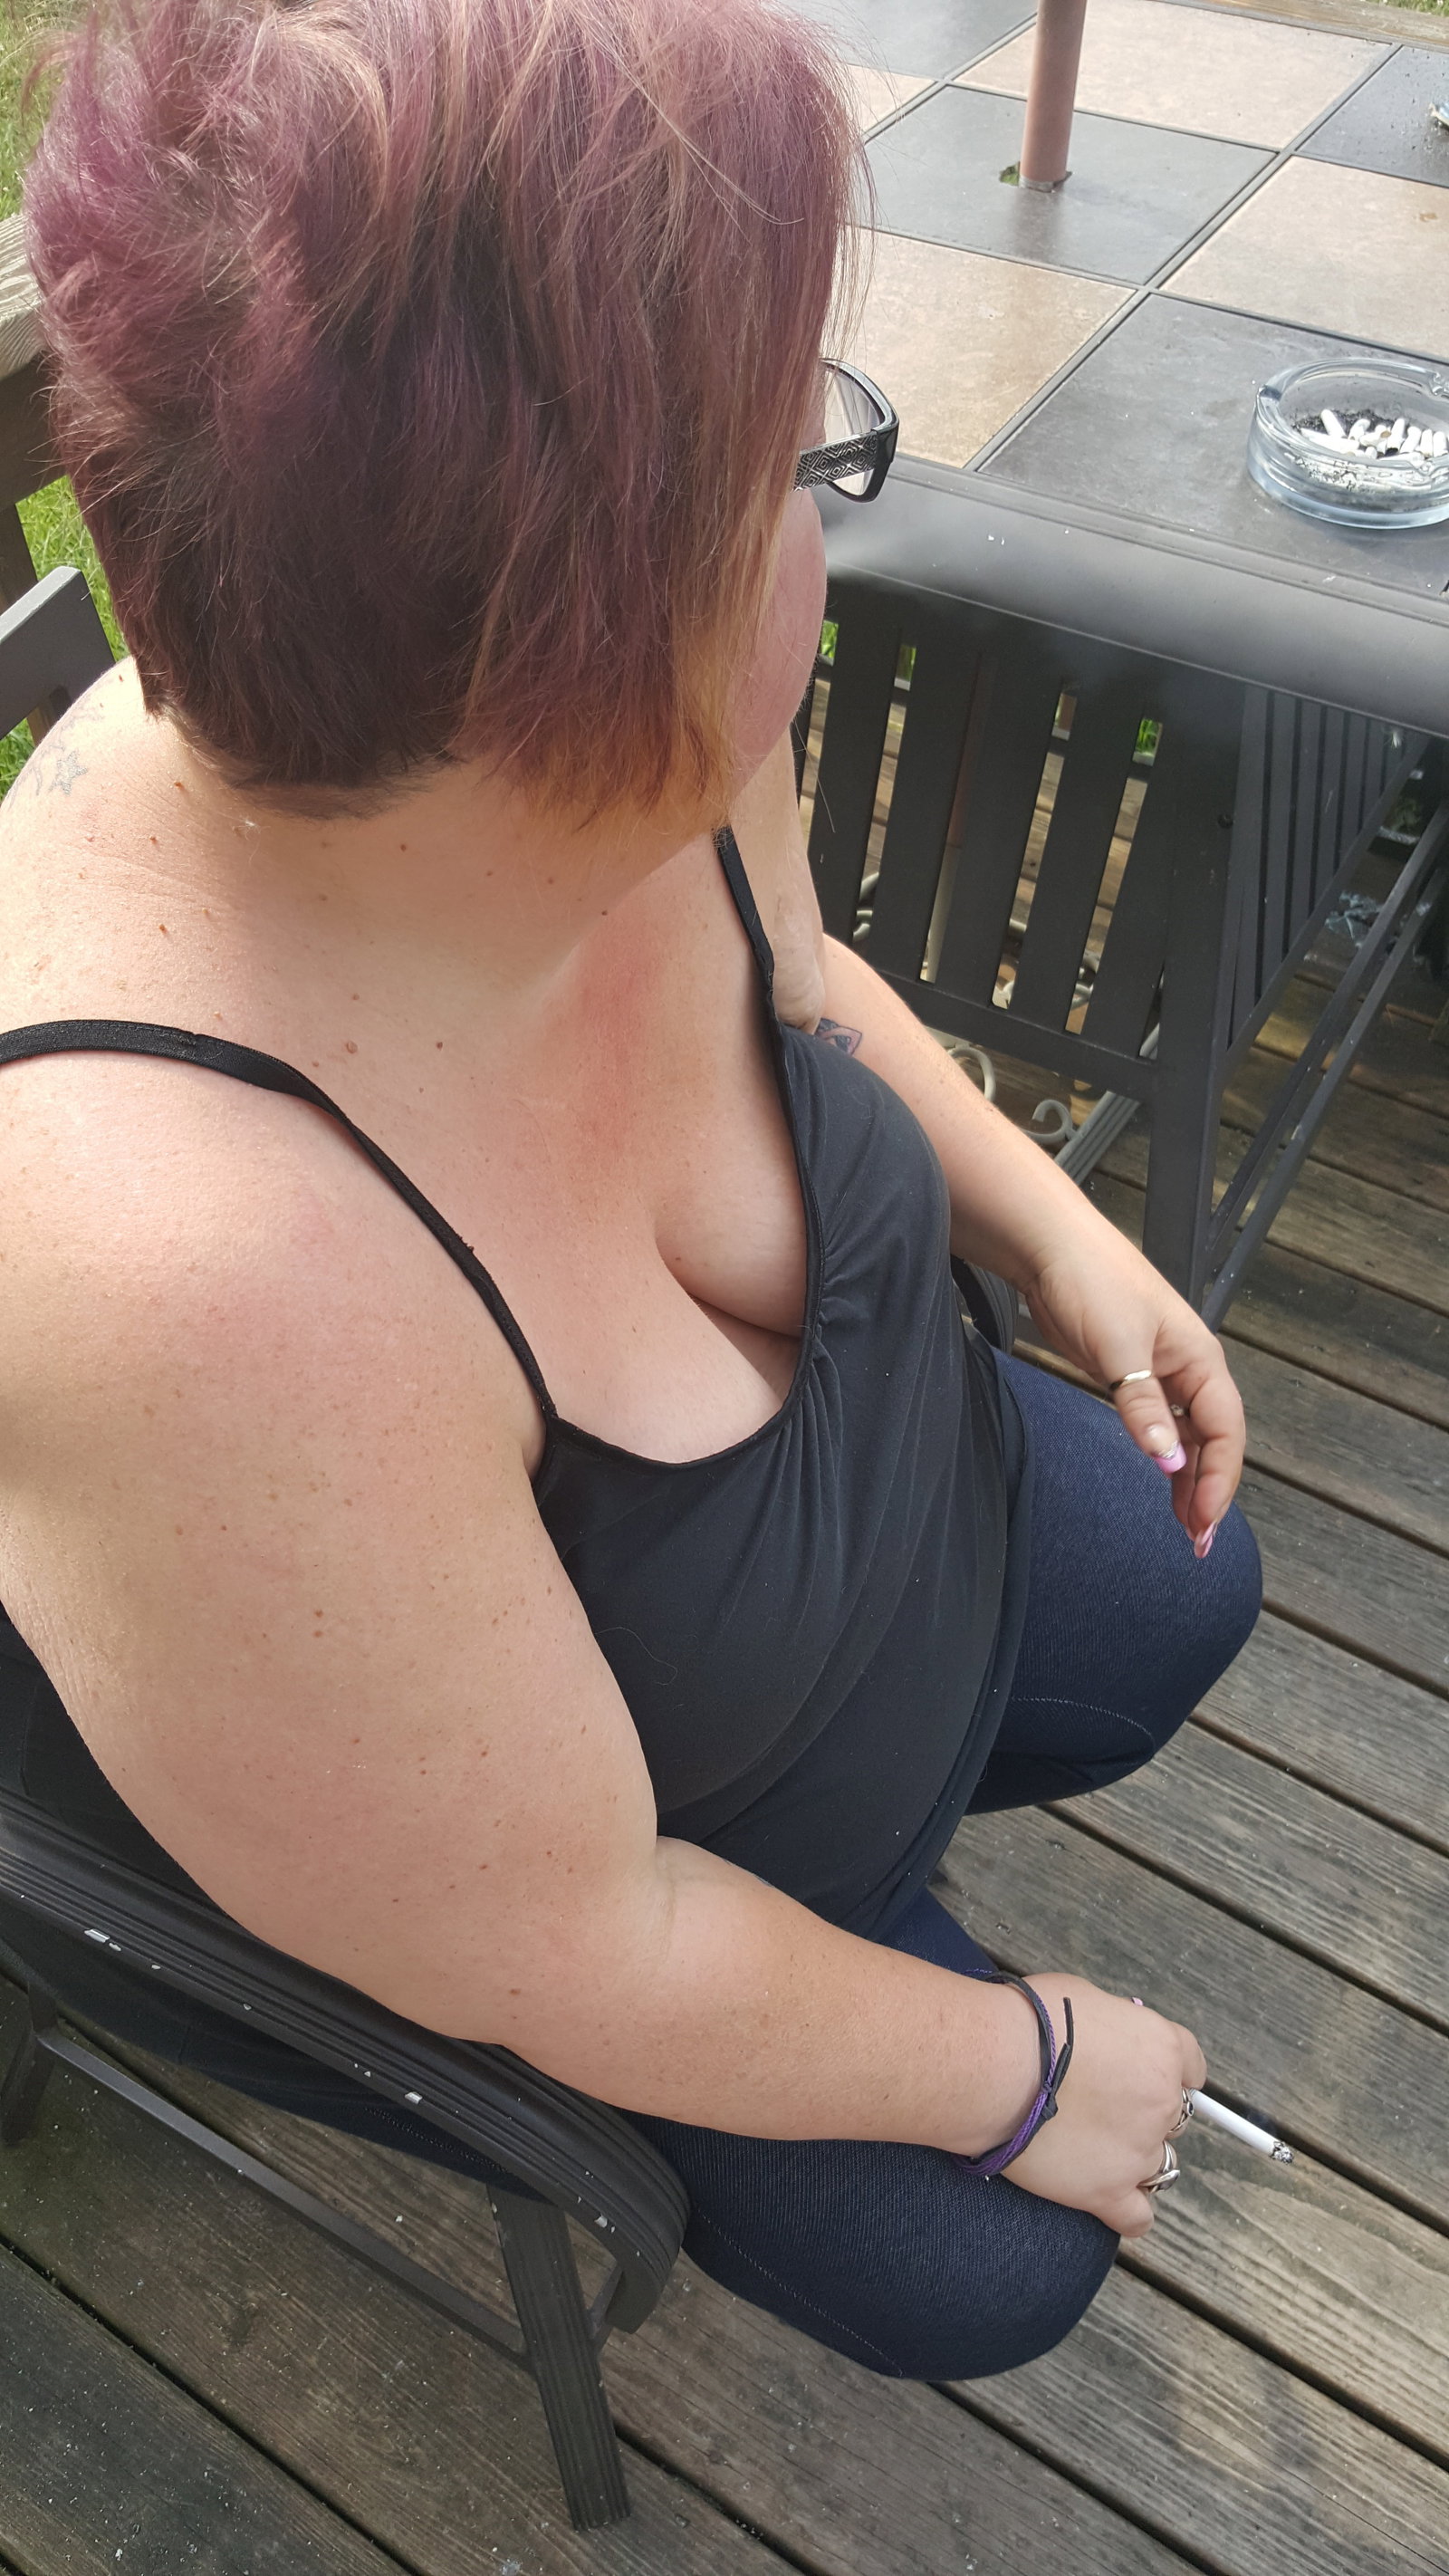 Photo by Dawn42D with the username @Dawn42D,  July 27, 2017 at 10:39 AM and the text says 'Sexy bbw wife having her morning cigarette. Look at her amazing cleavage! #smoking  #smoking  #bbw  #smoking  #wife  #sexy  #downblouse  #unaware  #wife  #smoking  #fetish  #cleavage  #big  #tits  #big  #naturals  #big  #hangers  #cigarette  #smoking..'